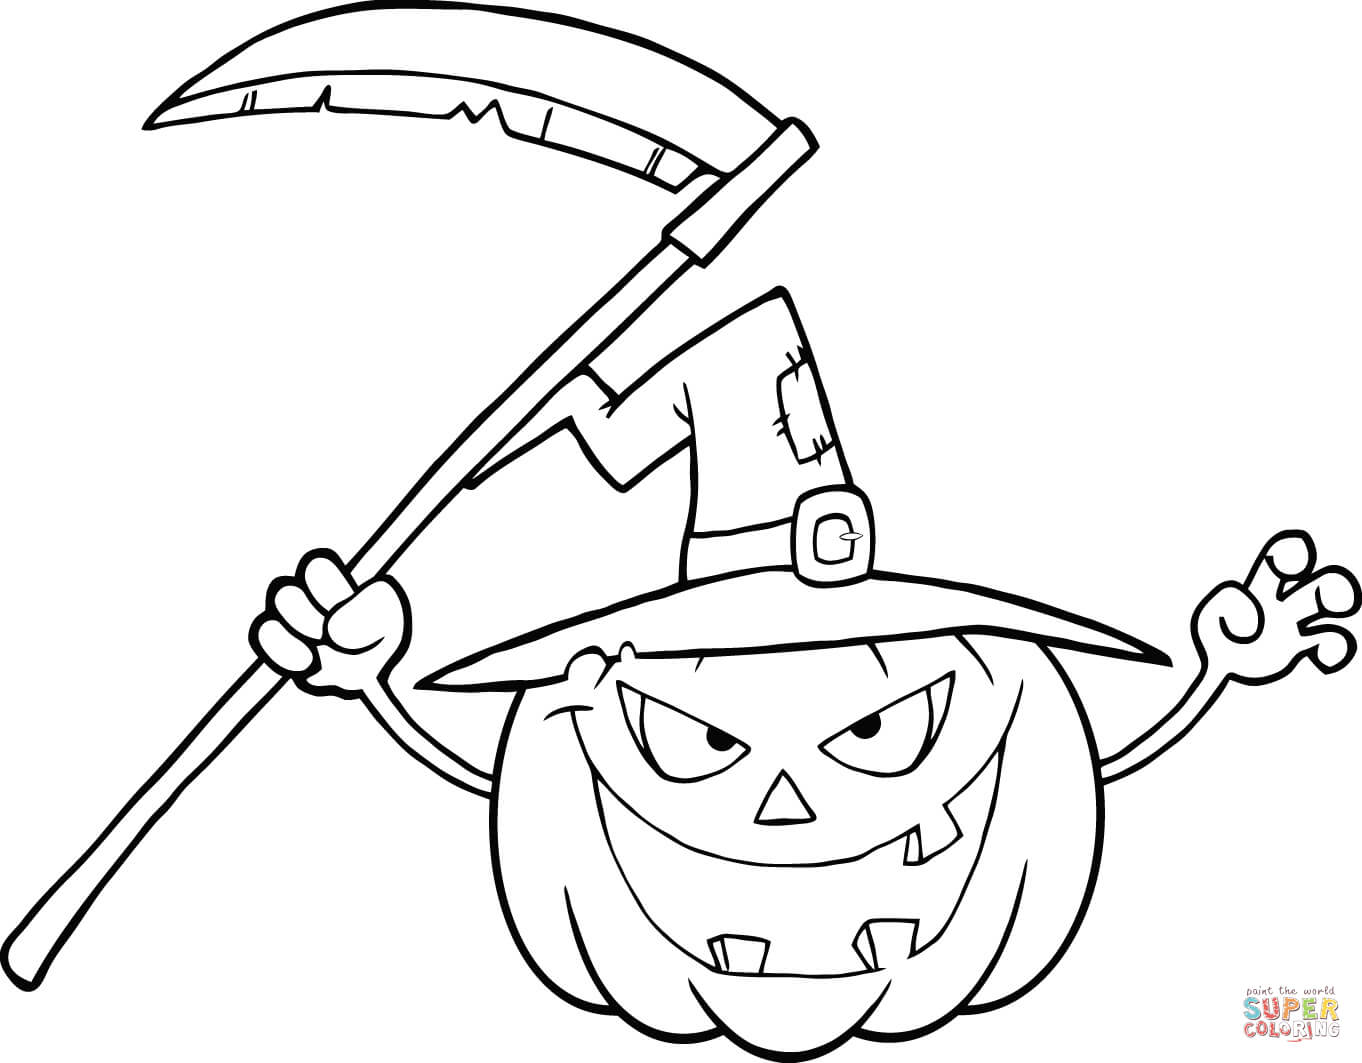 Scary halloween pumpkin with a witch hat and scythe coloring page free printable coloring pages